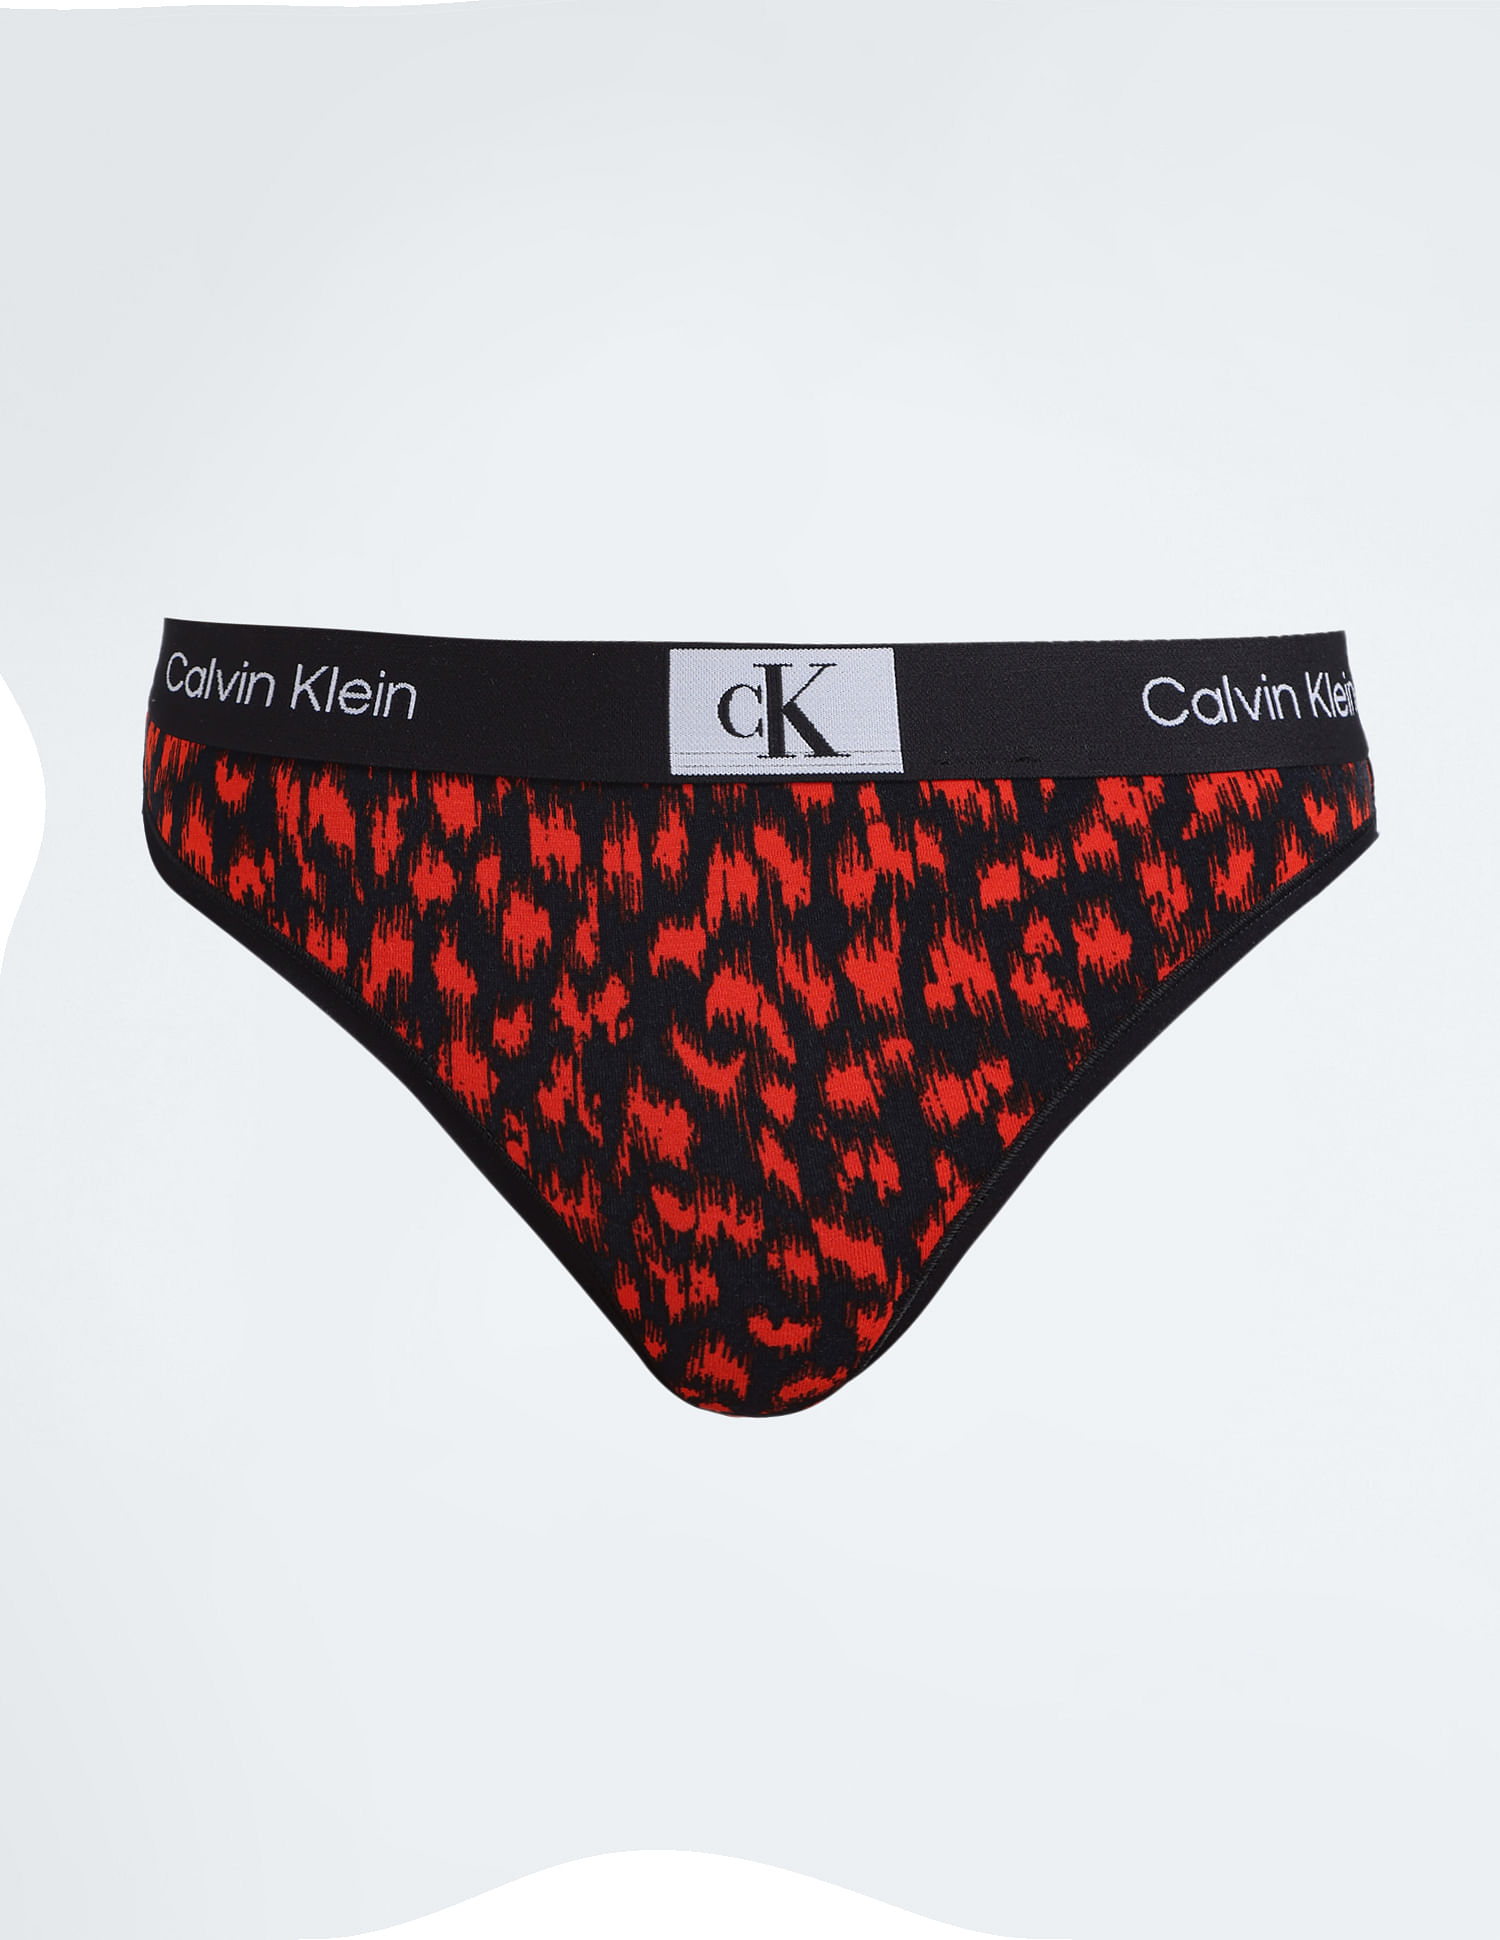 Recycled lace knickers, black, Calvin Klein Underwear